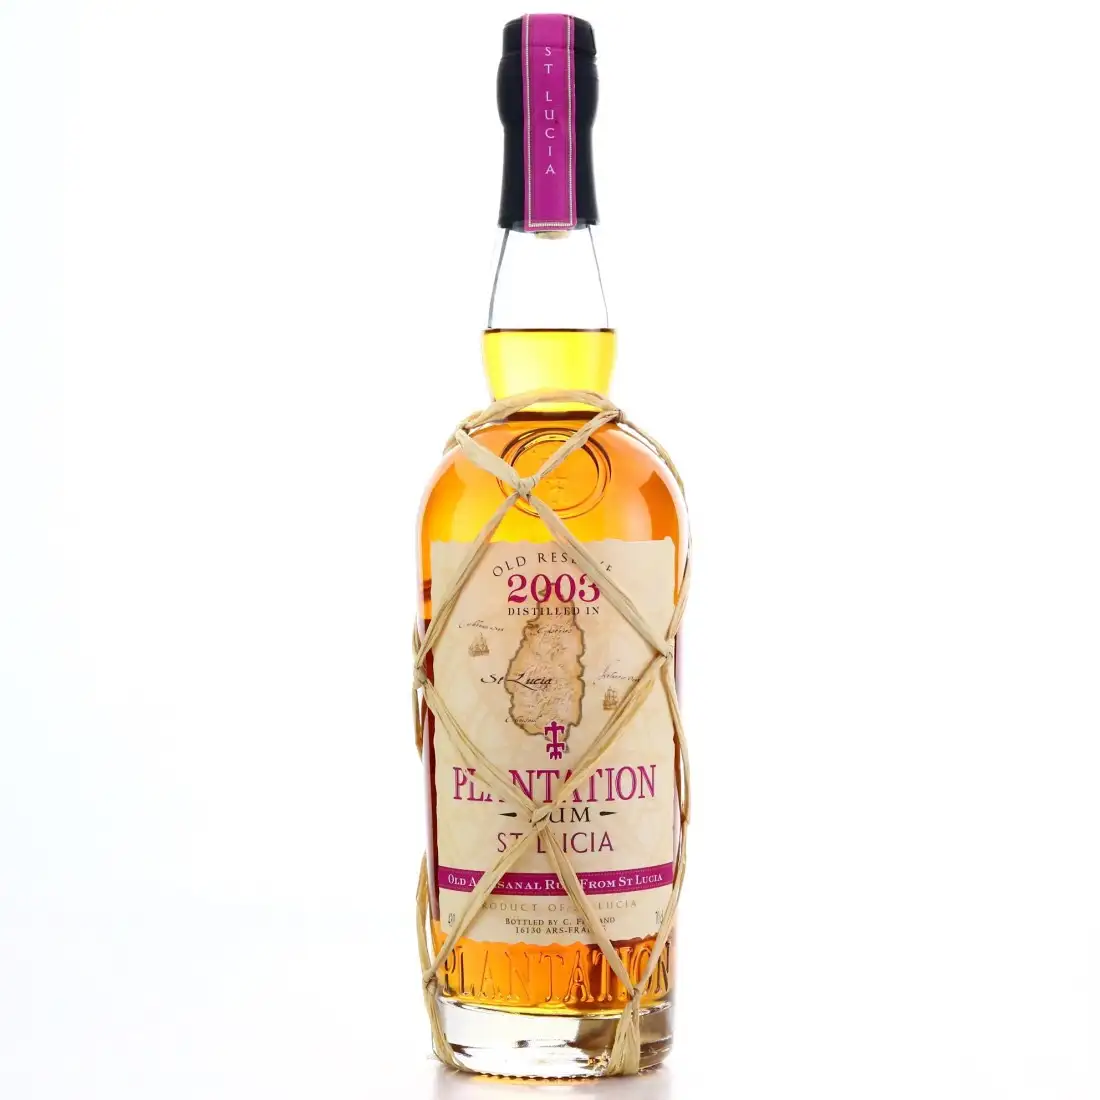 Image of the front of the bottle of the rum Plantation Old Reserve